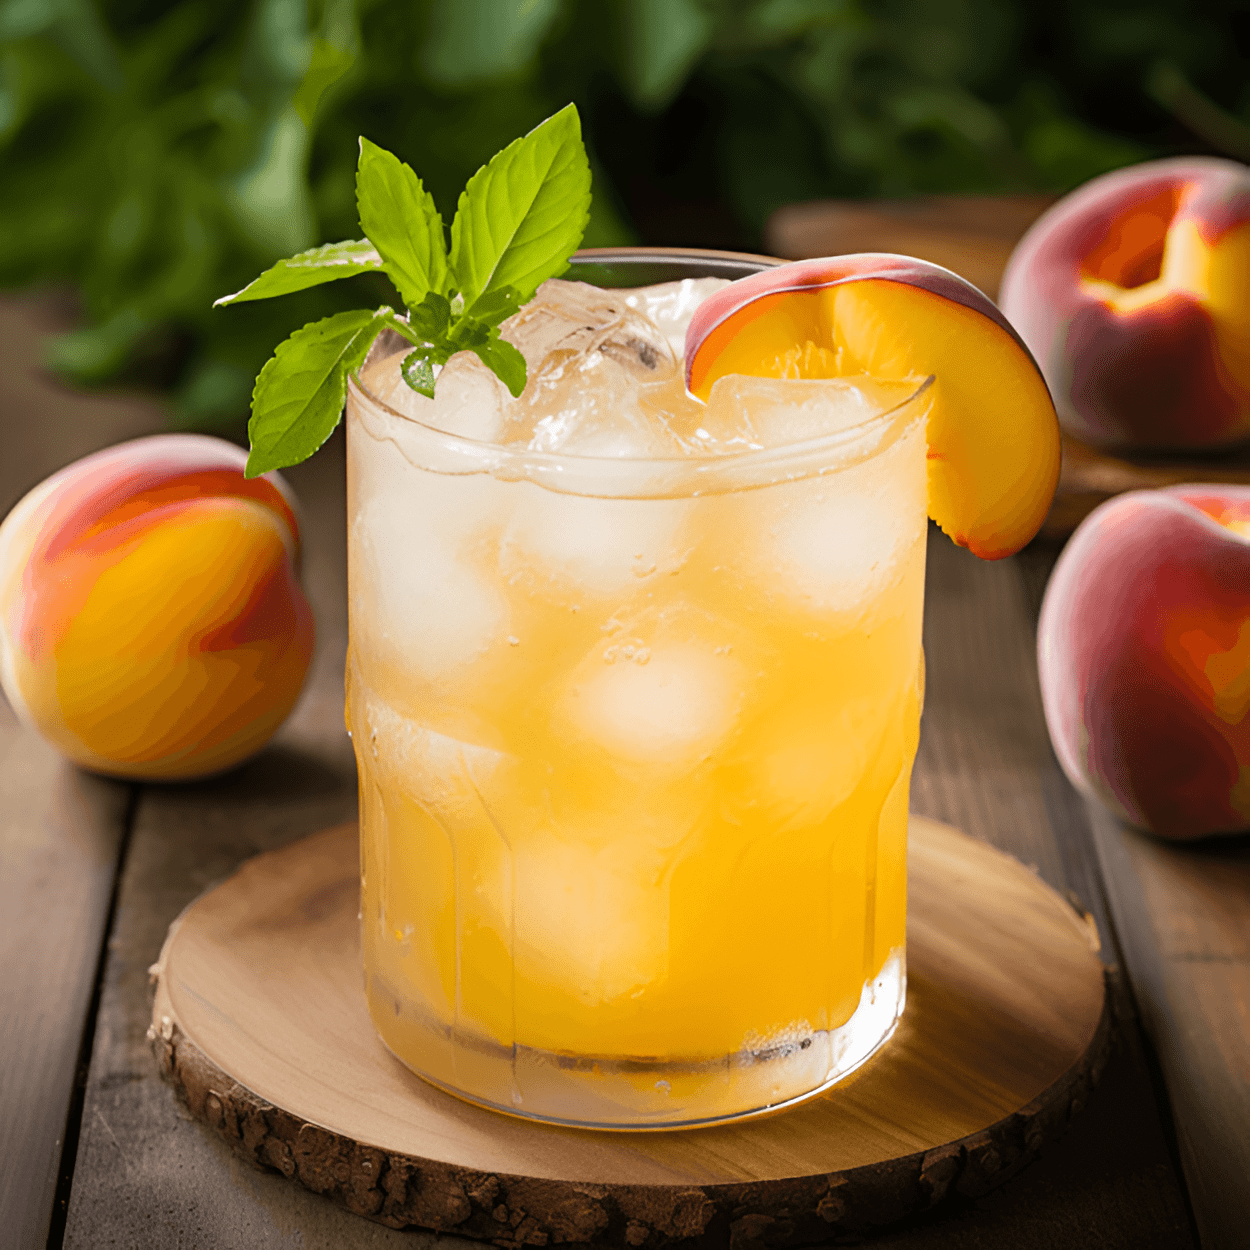 Peach Cobbler Cocktail Recipe - The Peach Cobbler Cocktail is a sweet, fruity cocktail with a hint of tartness from the lemon juice. The peach schnapps gives it a strong peach flavor, while the bourbon adds a bit of warmth and depth. The sugar rim adds an extra touch of sweetness.